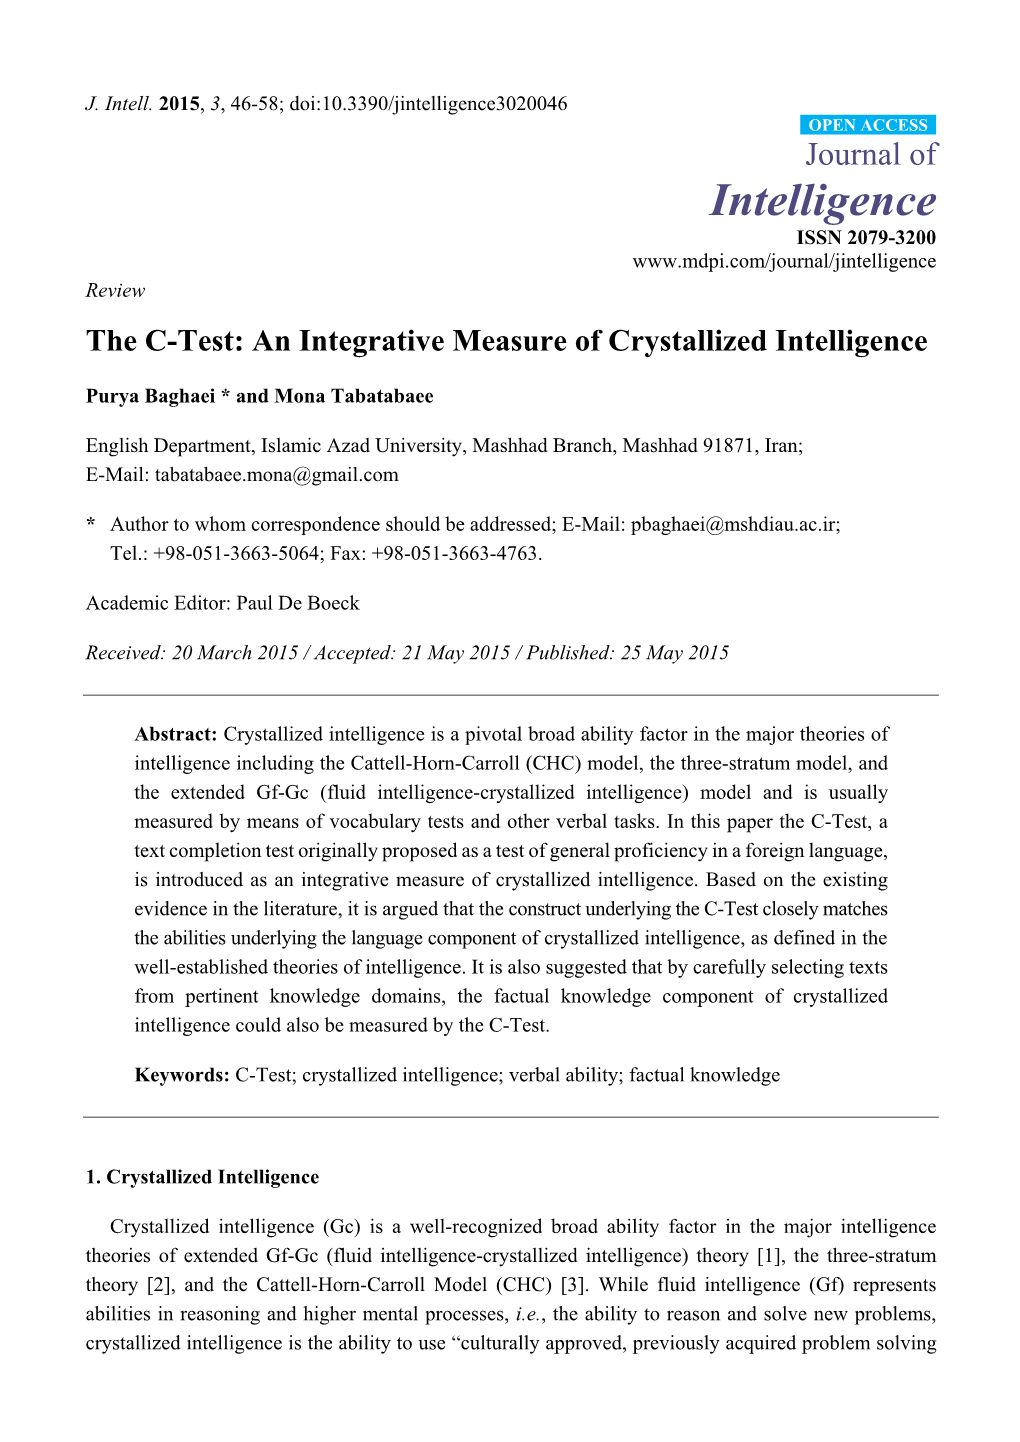 An Integrative Measure of Crystallized Intelligence